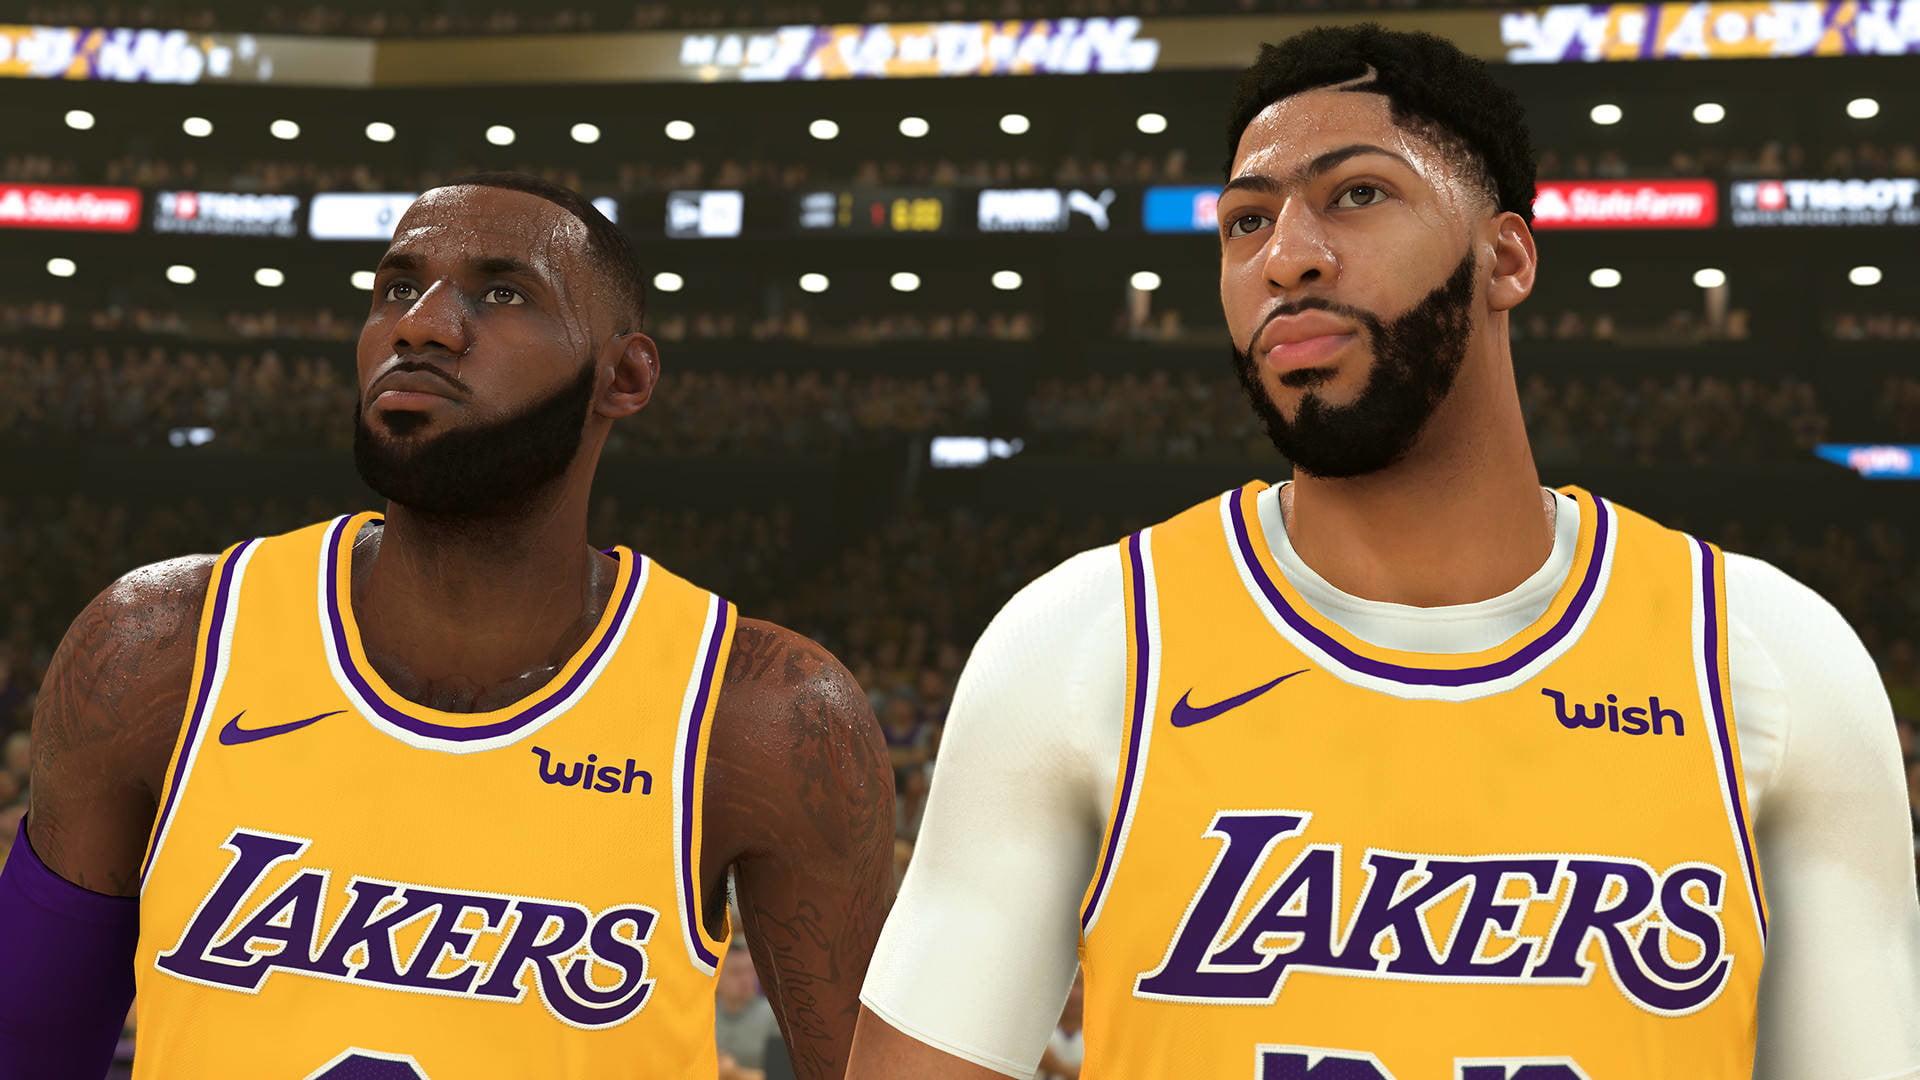 NBA 2K20. Release Date, Modes, Story, Gameplay Changes, and More